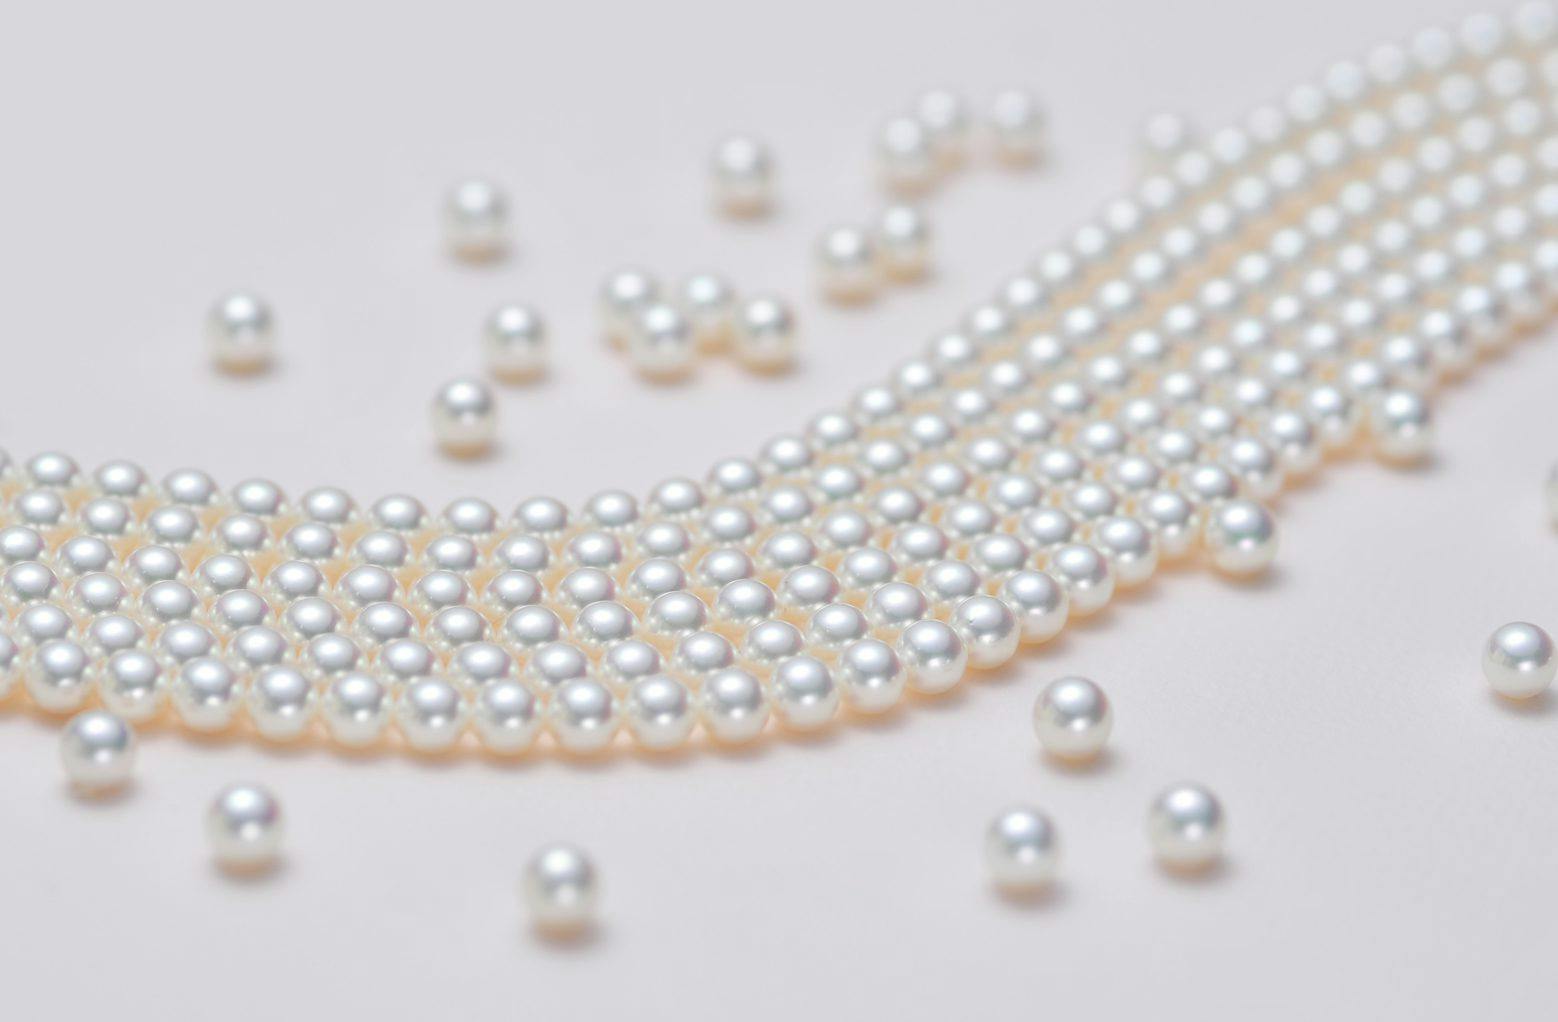 Akoya pearls with pink overtones - pearl engagement ring stones